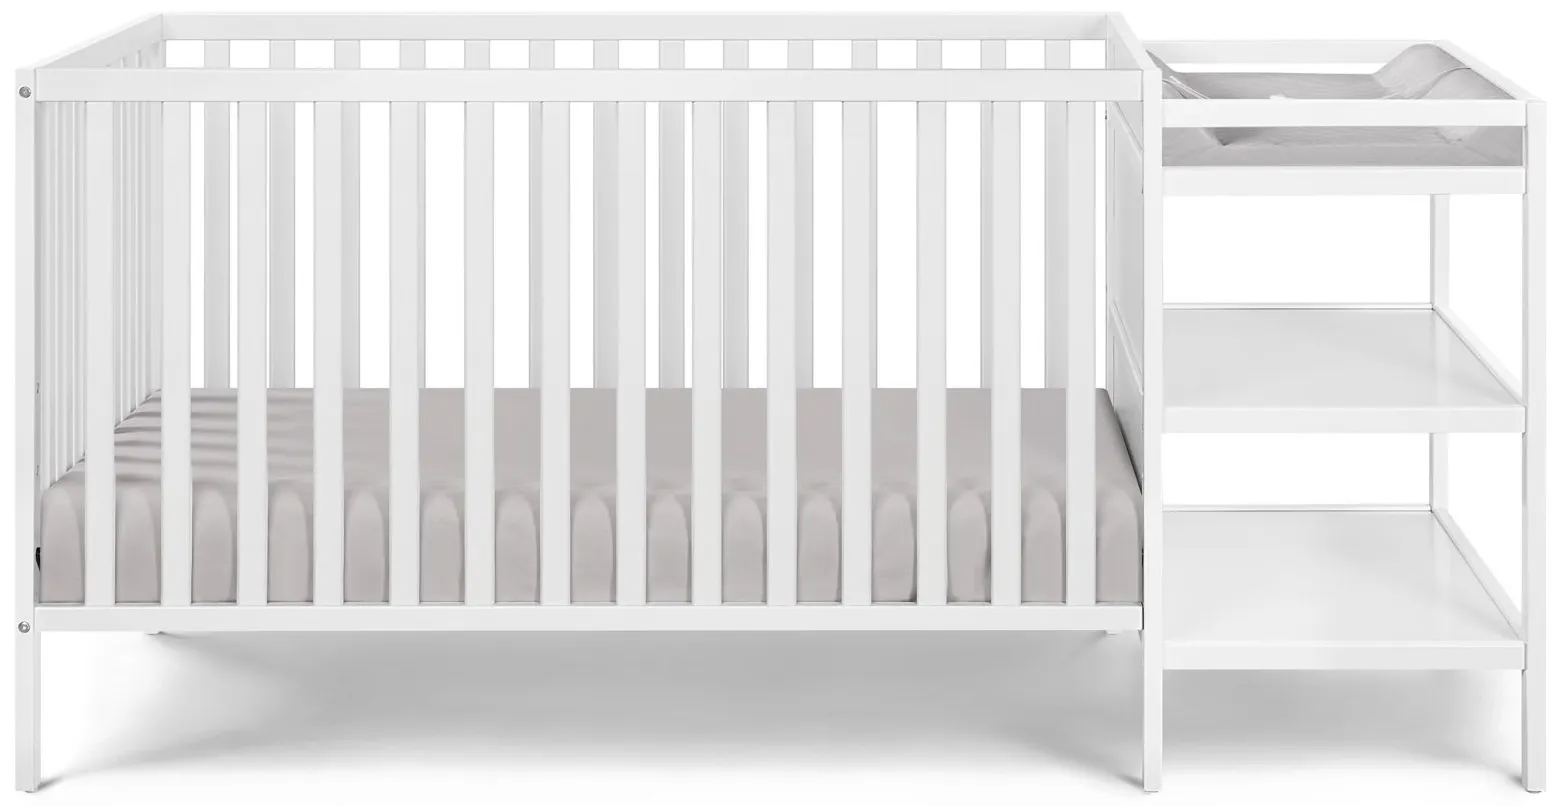 Palmer 3-in-1 Convertible Crib & Changer in White by Heritage Baby